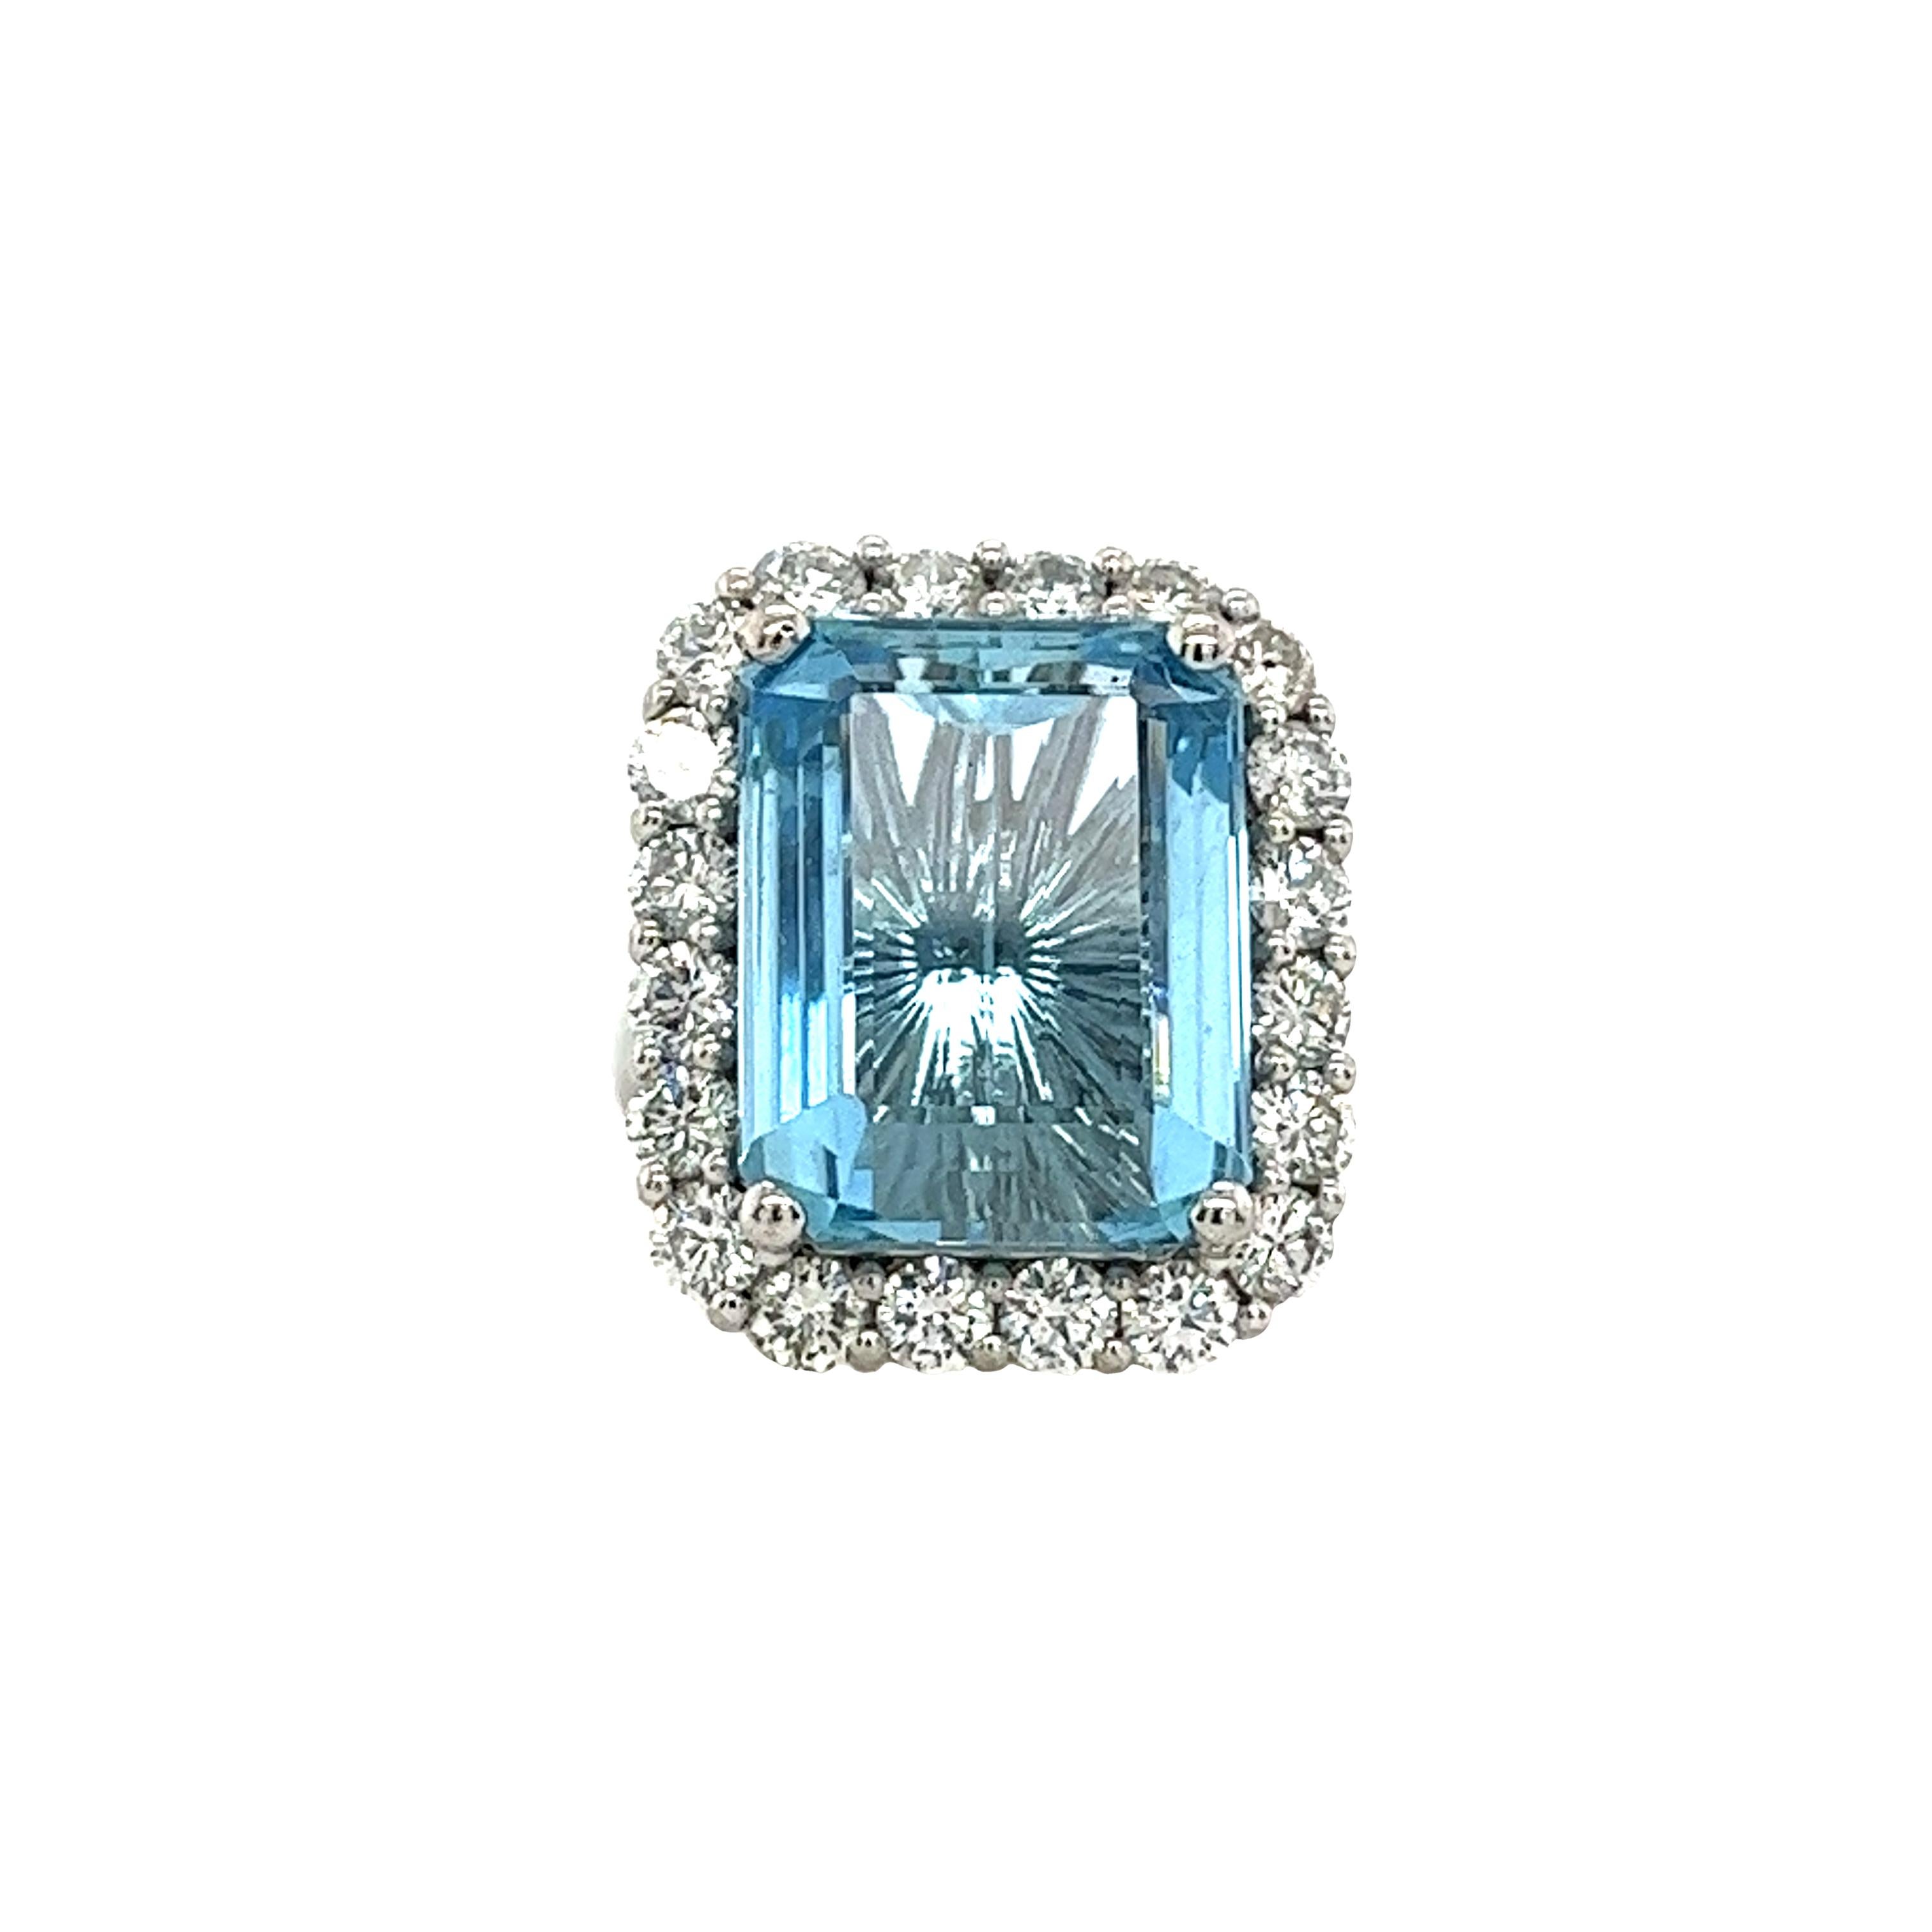 This gorgeous 12ct fine quality aquamarine ring
surrounded by 20 round brilliant  cut diamonds,
with a total diamond weight of 2.90ct G/VS natural diamonds,
is set in platinum setting. 

This is a unique and eye-catching dress/cocktail ring.
Total